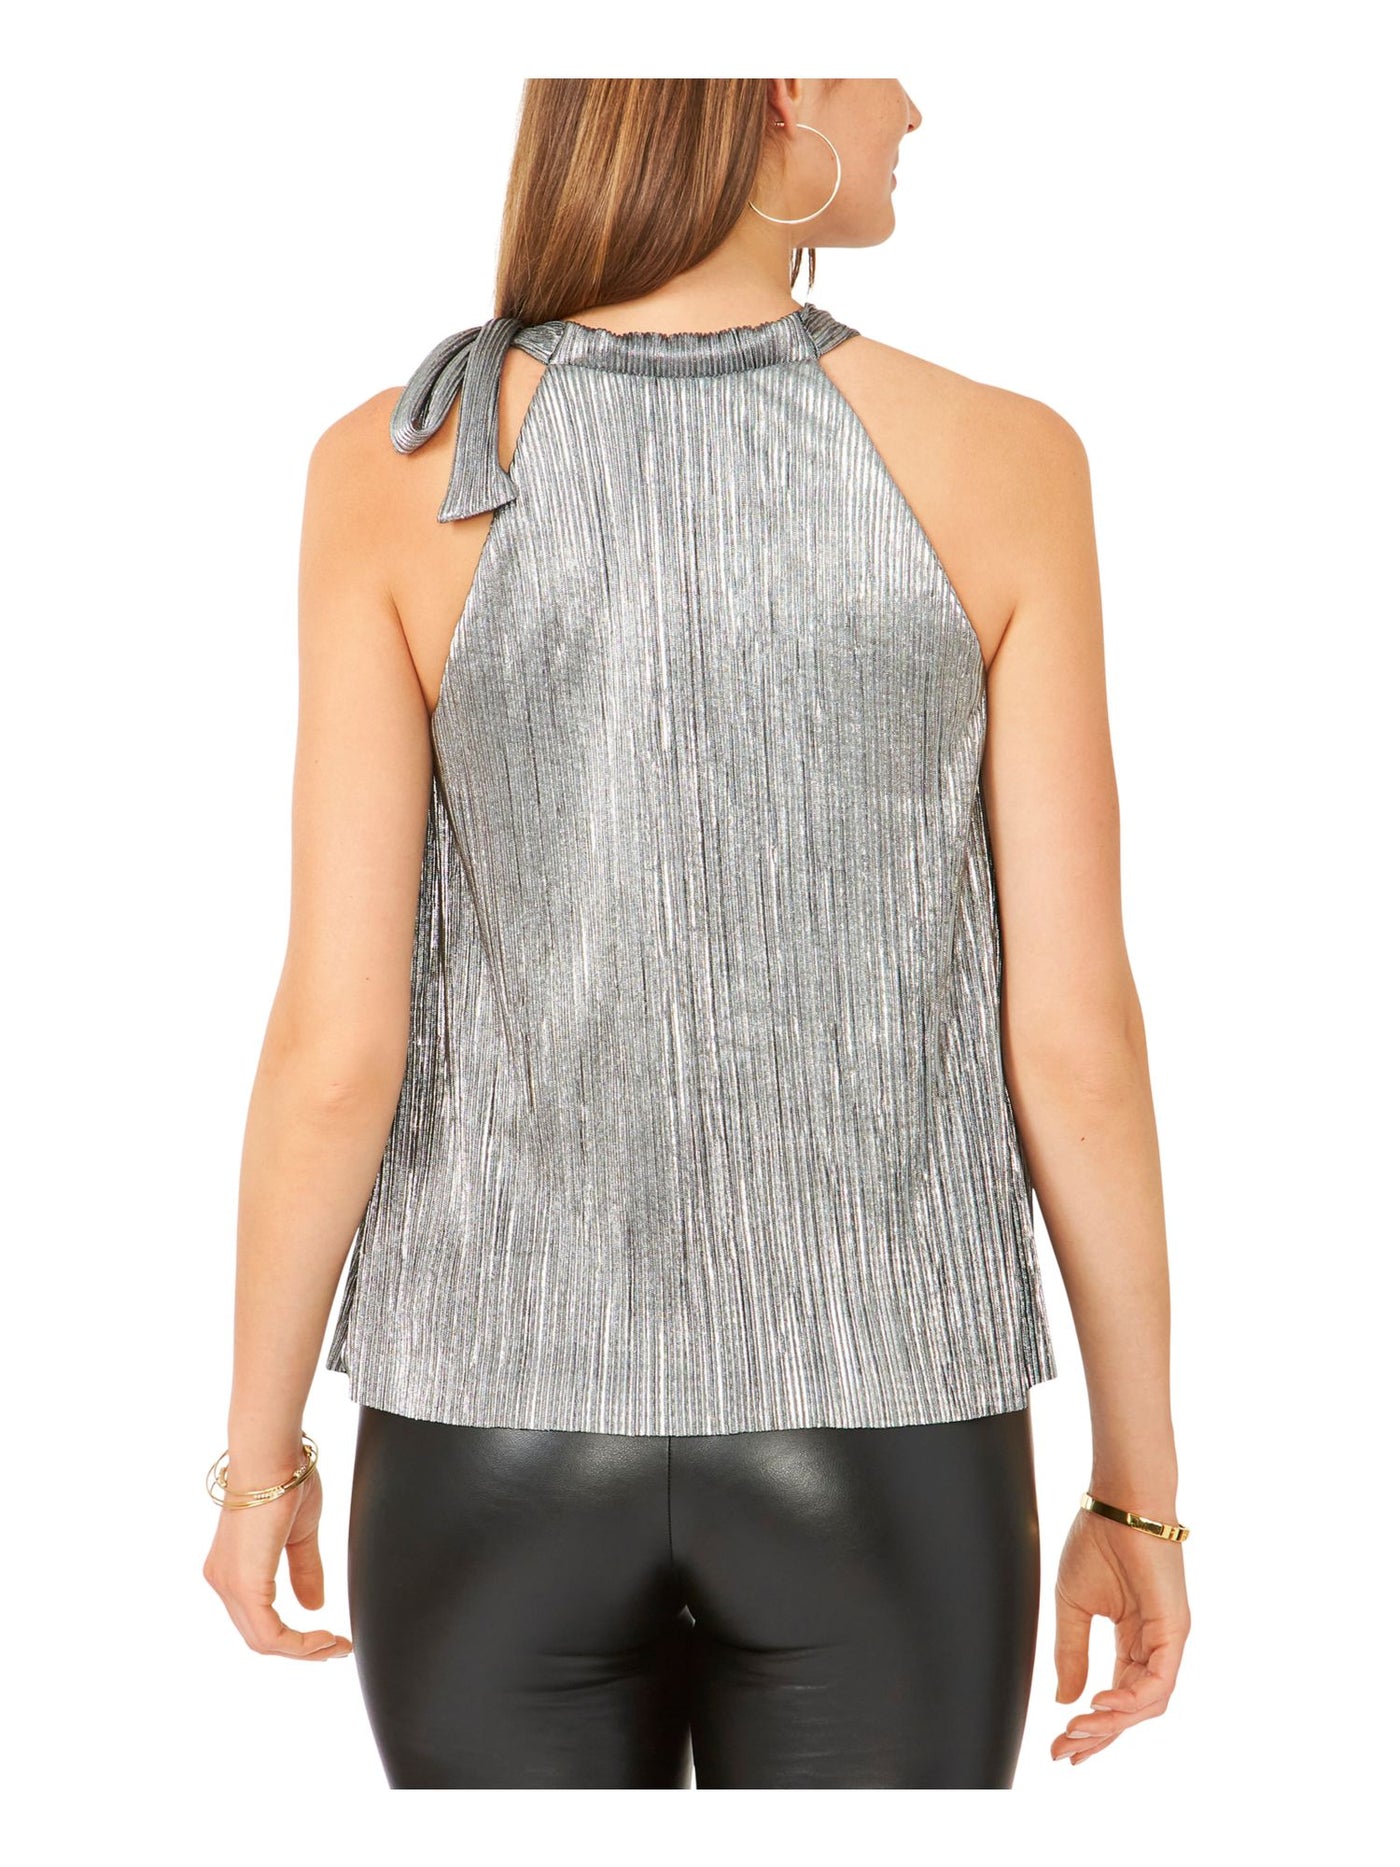 28TH & PARK Womens Silver Metallic Pleated Tie Neck Lined Sleeveless Halter Evening Top Juniors XS